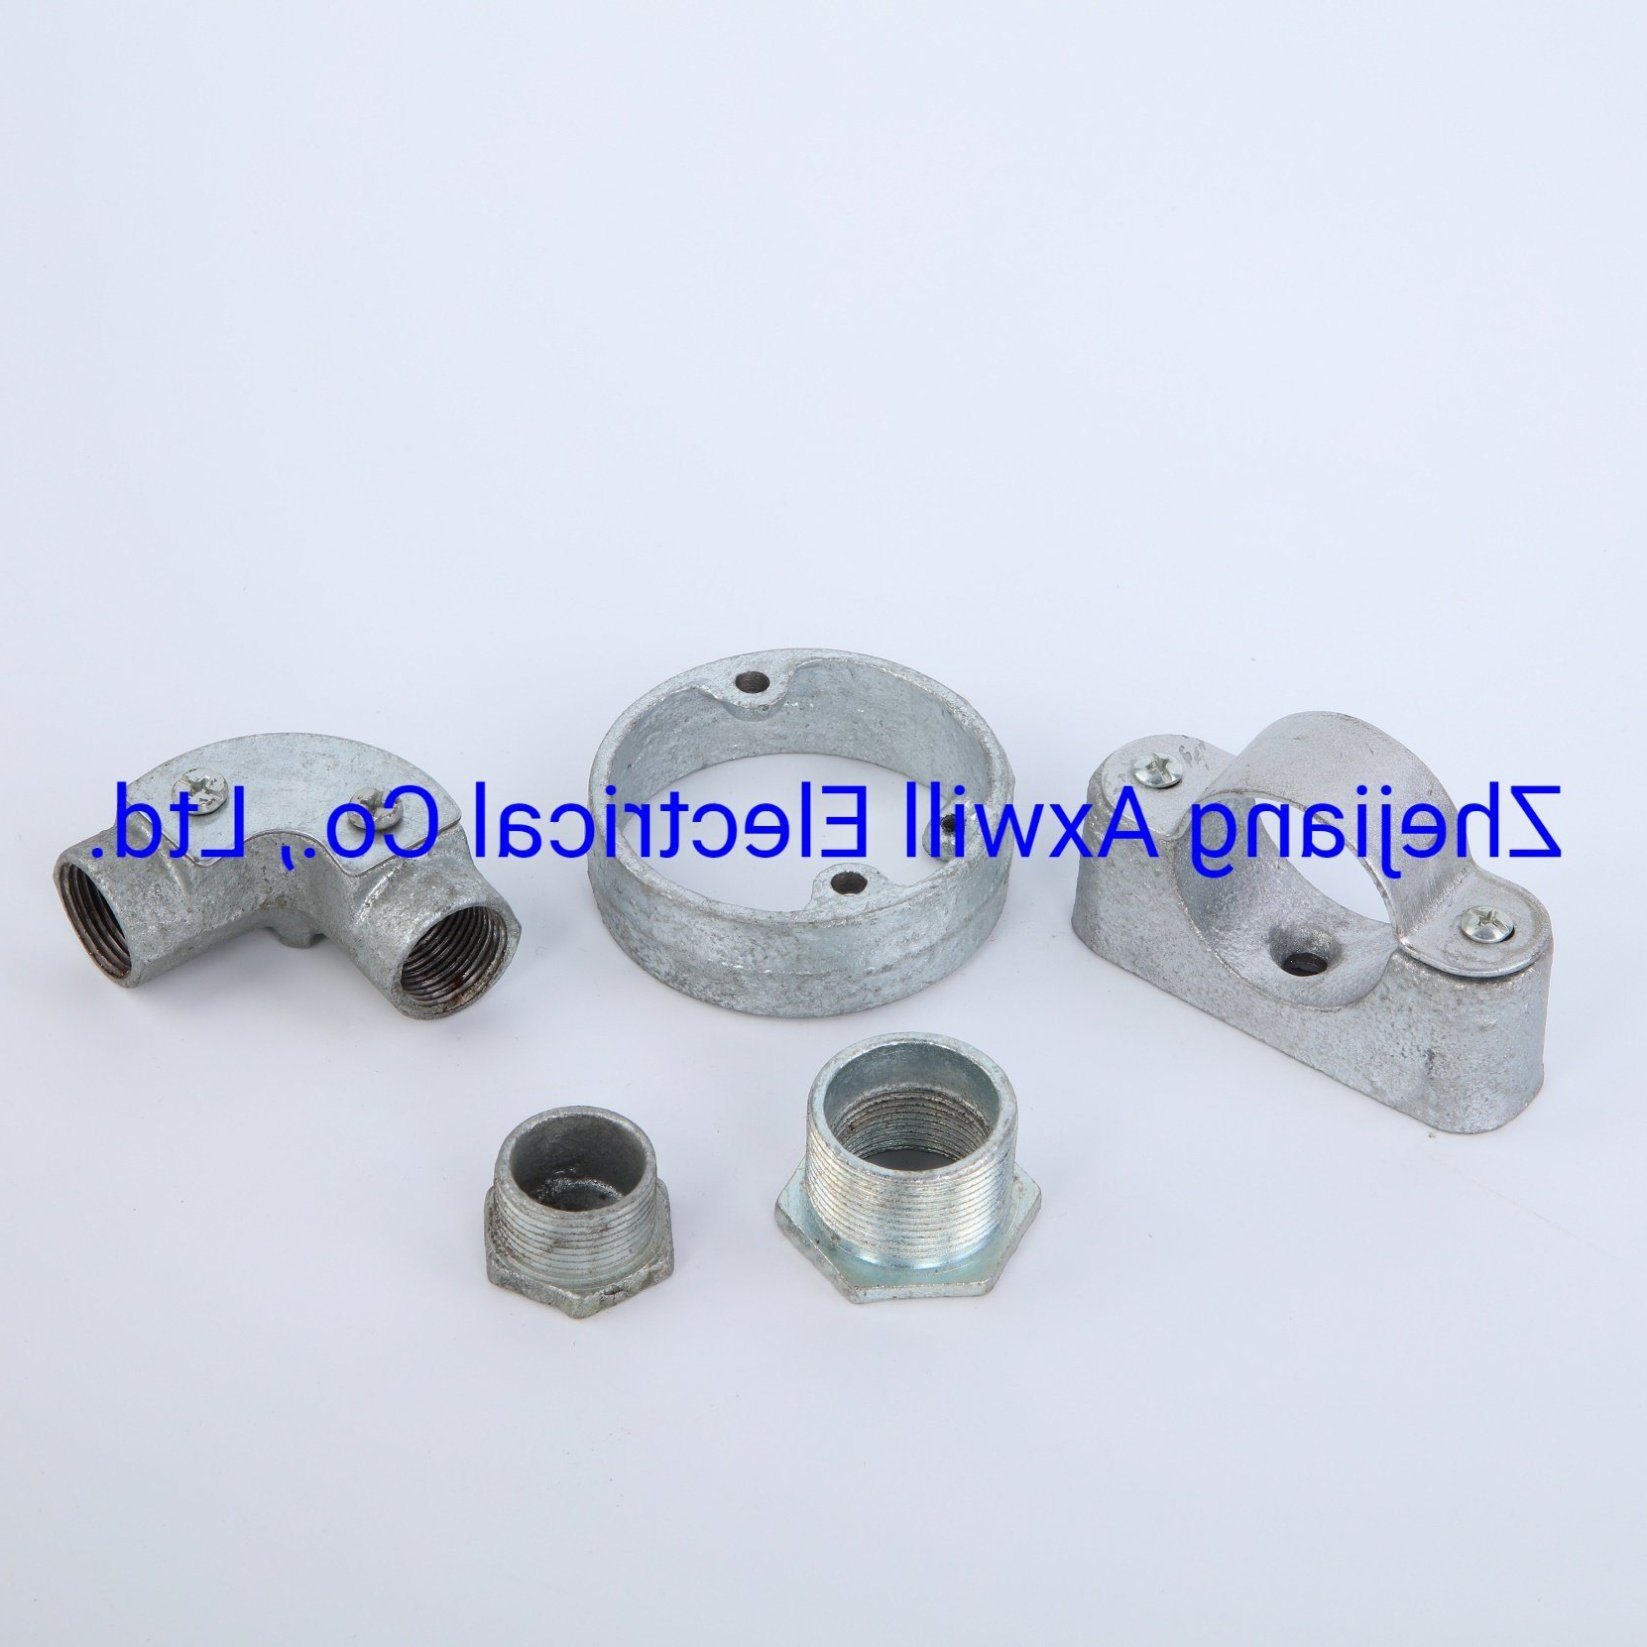 Malleable OEM Service Iron Pigtail Hot DIP